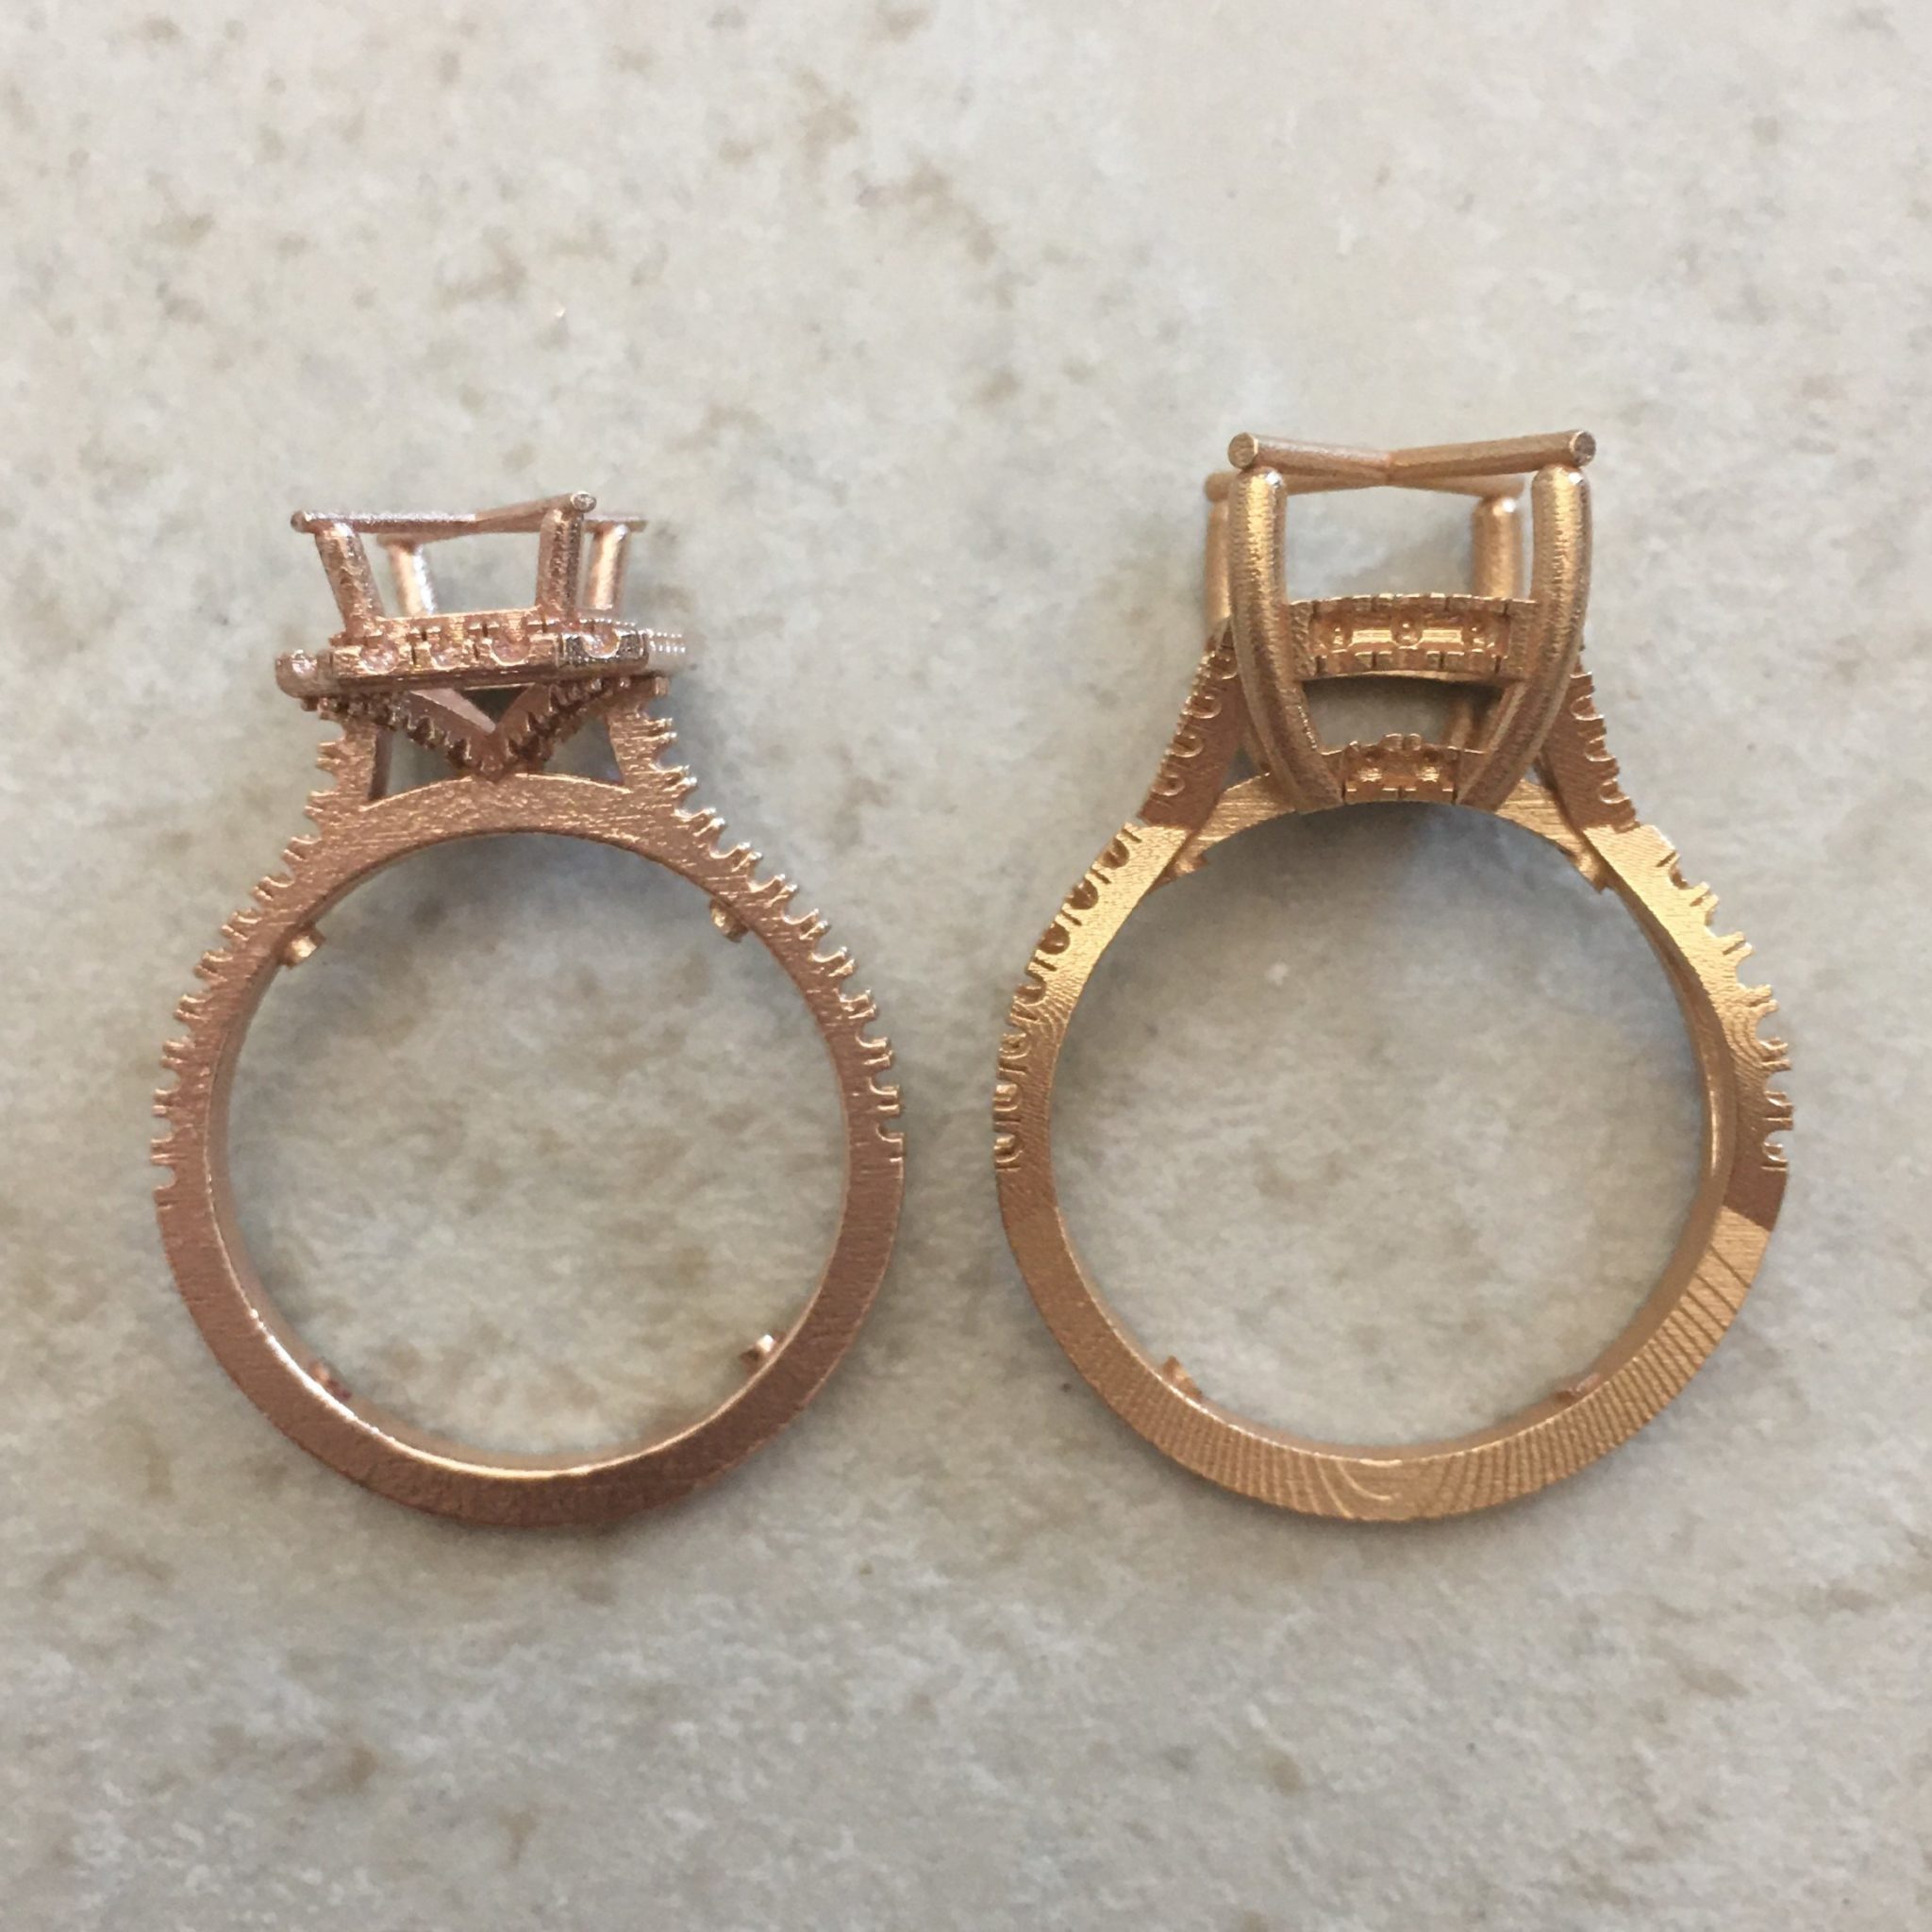 14k or 18k rose gold - which one should I choose? Laurie Sarah's pros